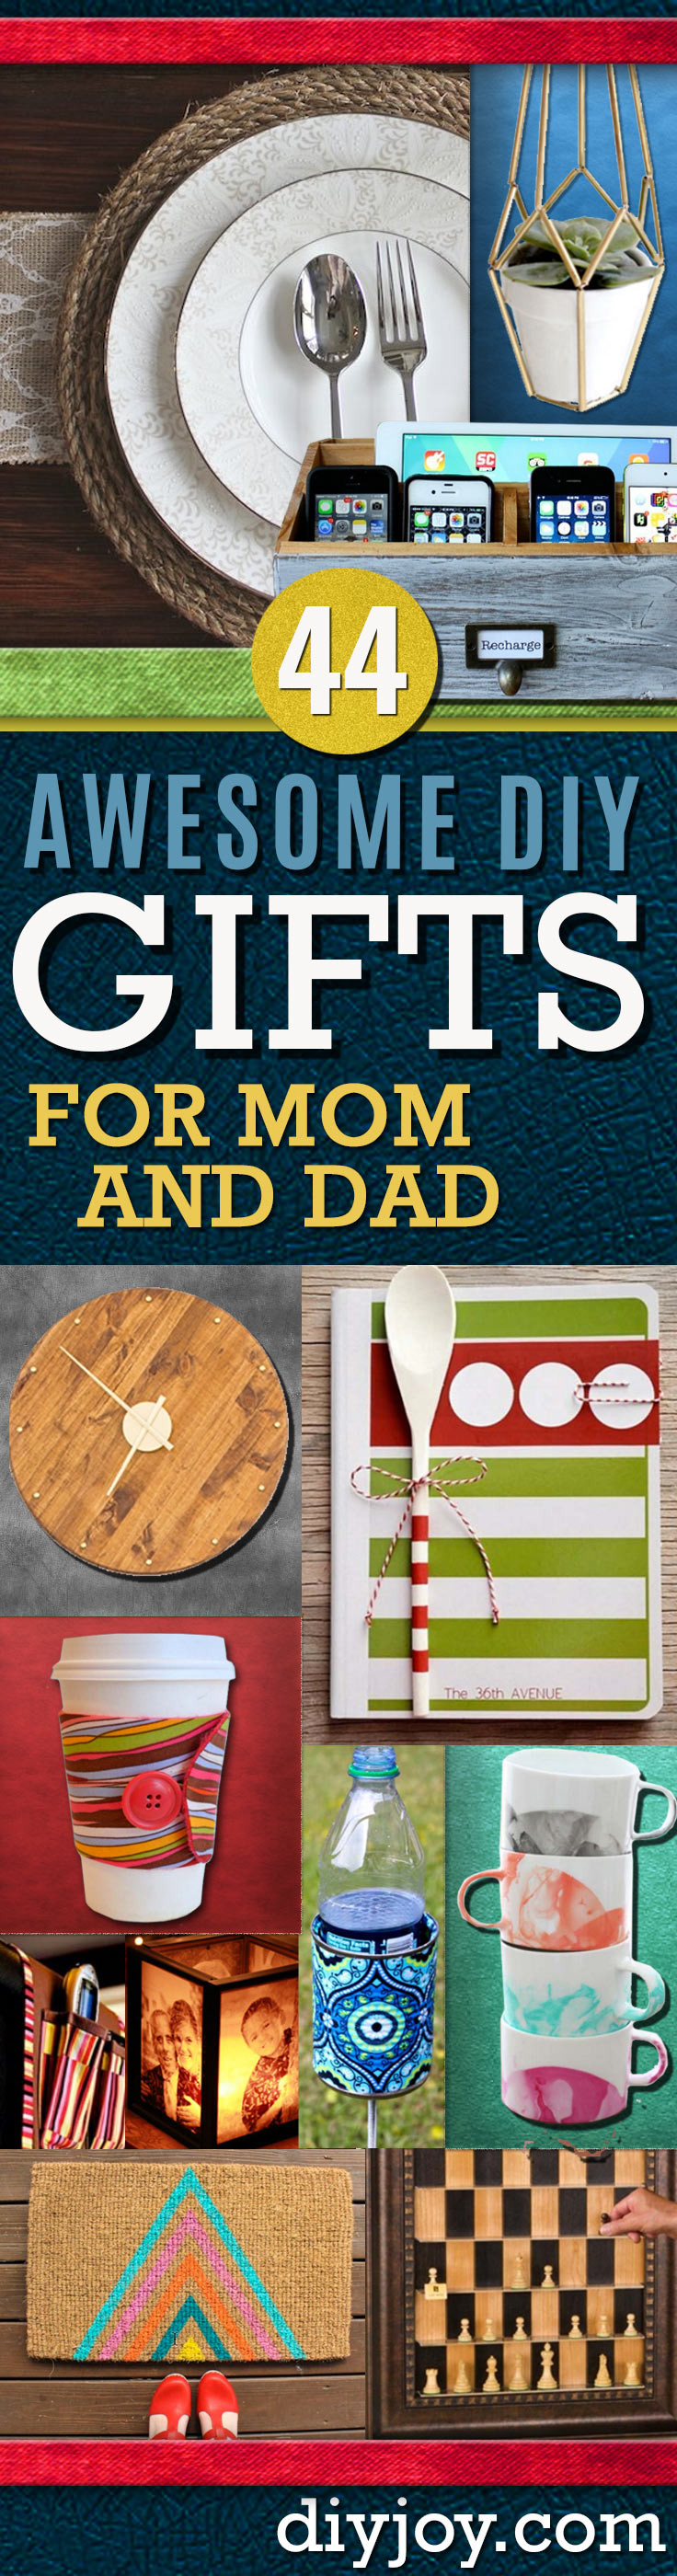 DIY Gifts For Dads Christmas
 Awesome DIY Gift Ideas Mom and Dad Will Love